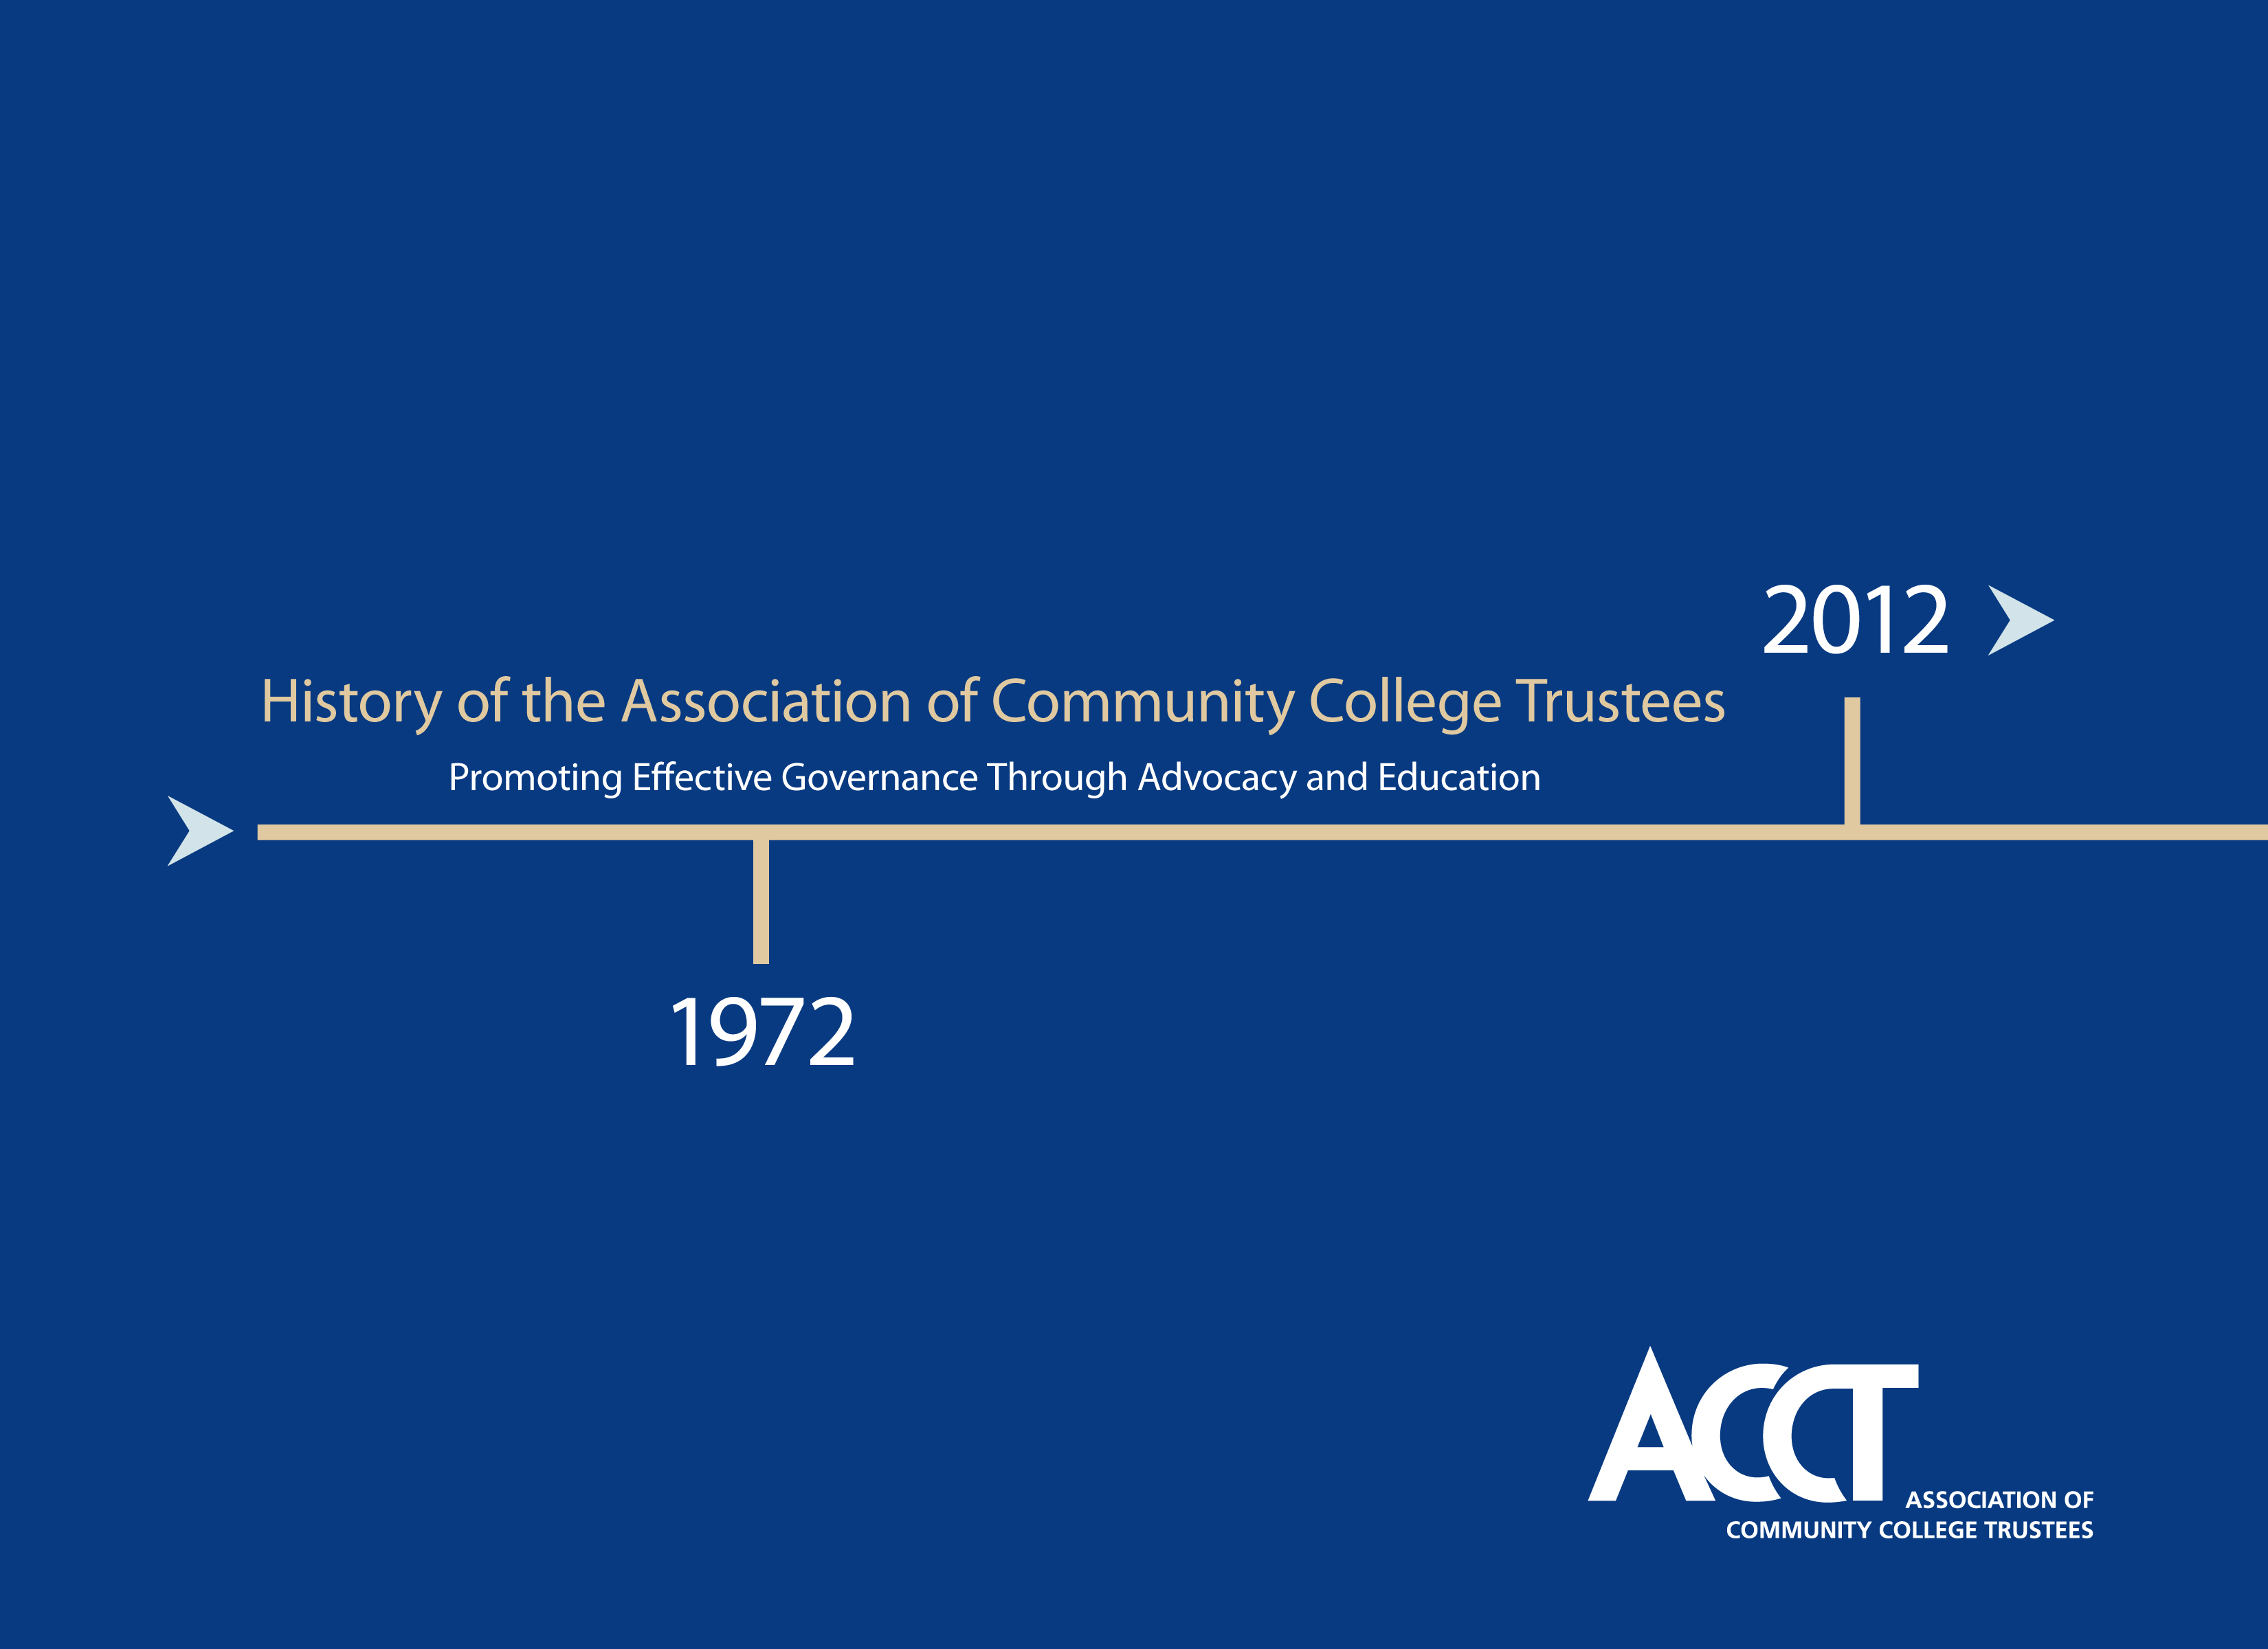 History of the Association of Community College Trustees 1972-2012